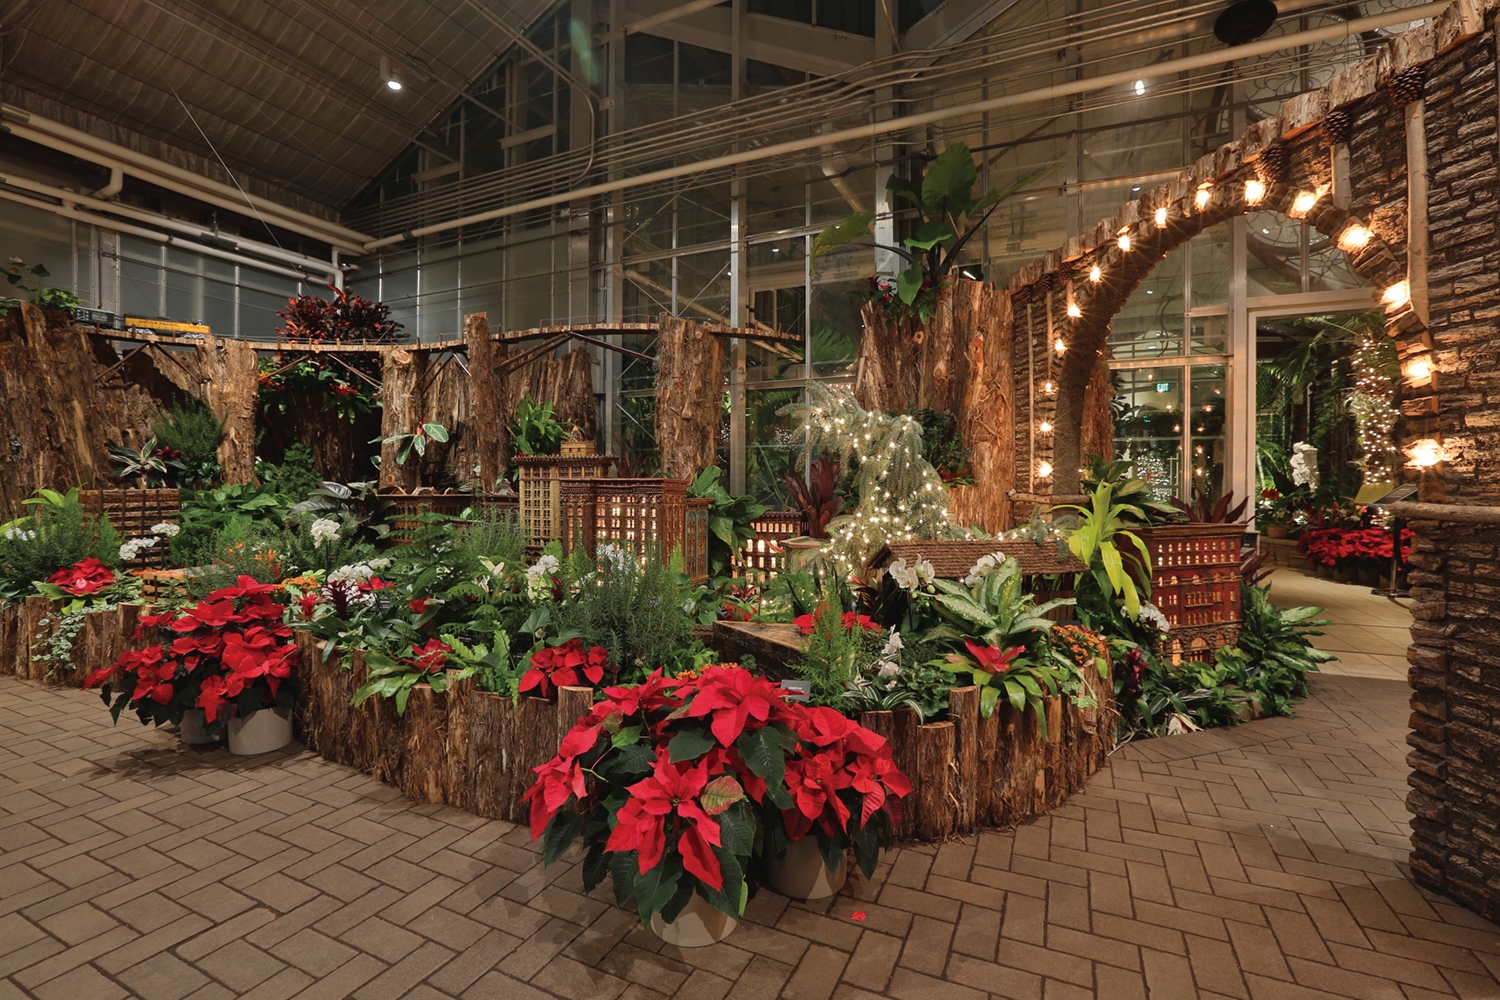 Snow & Symbols: Meijer Gardens explores the importance of holidays across the globe with cultural symbols